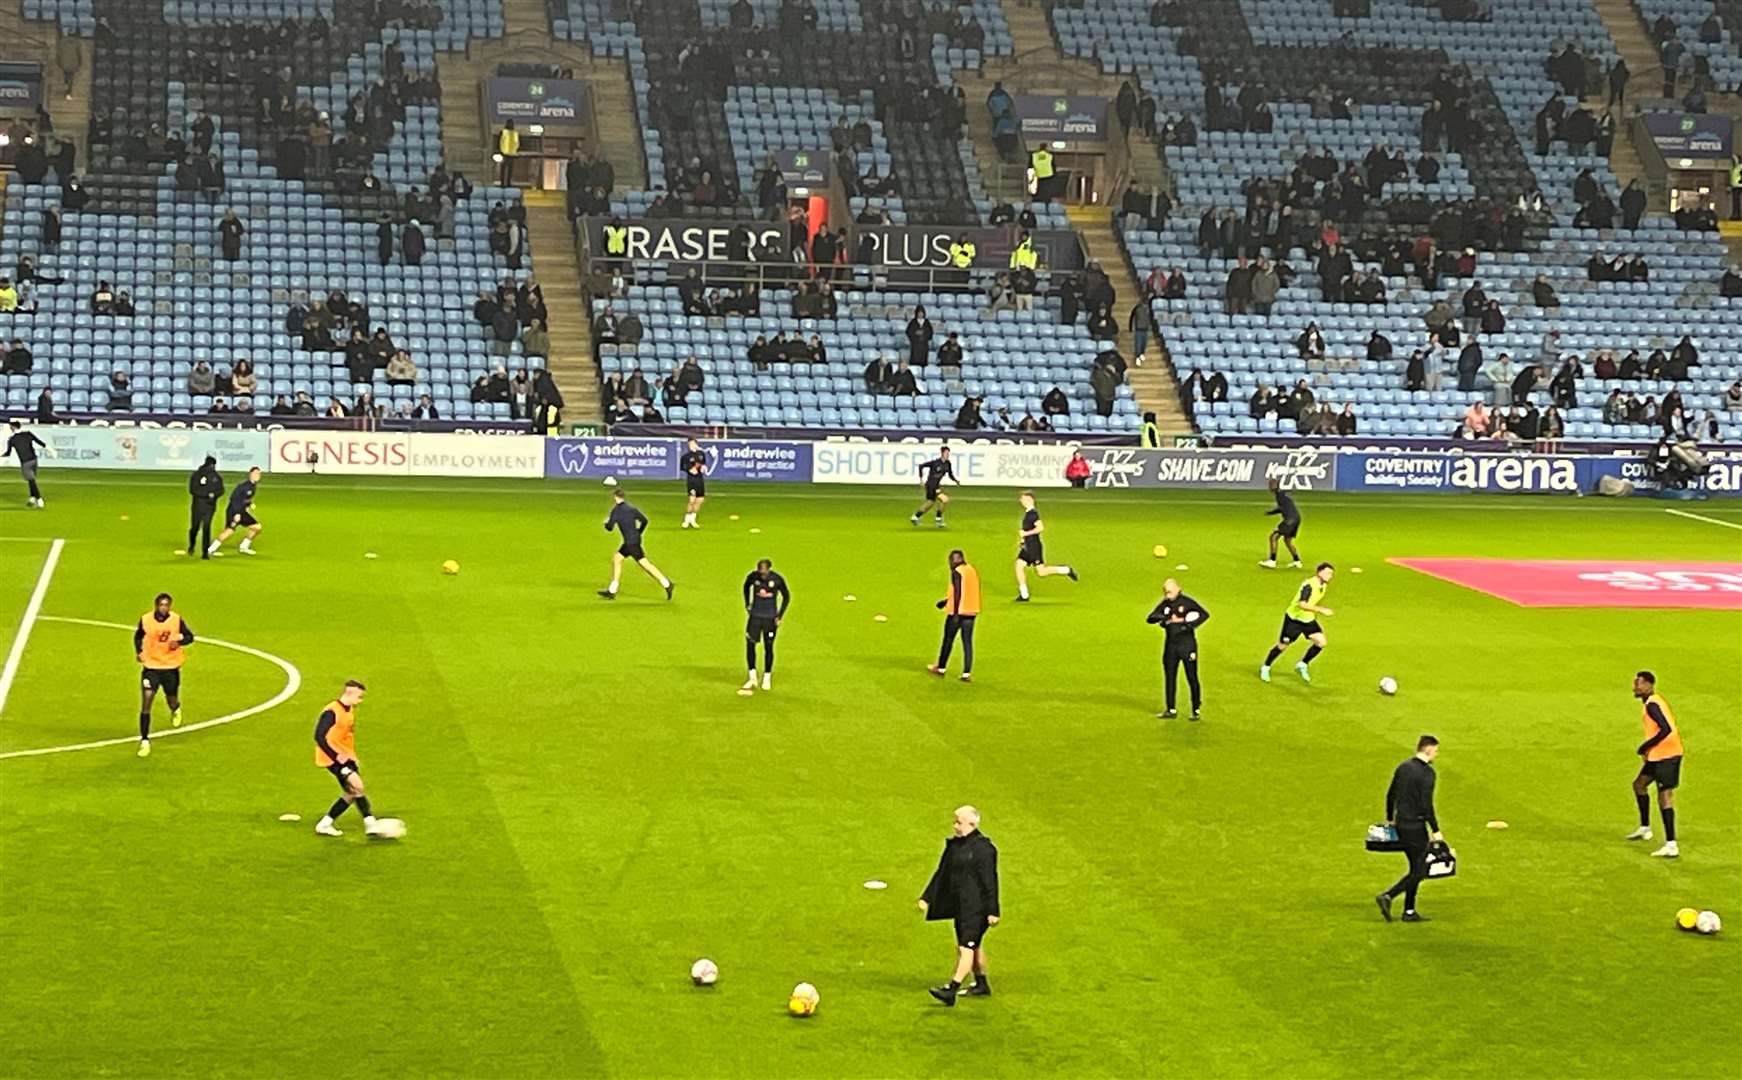 Stones players are out on the pitch warming up.